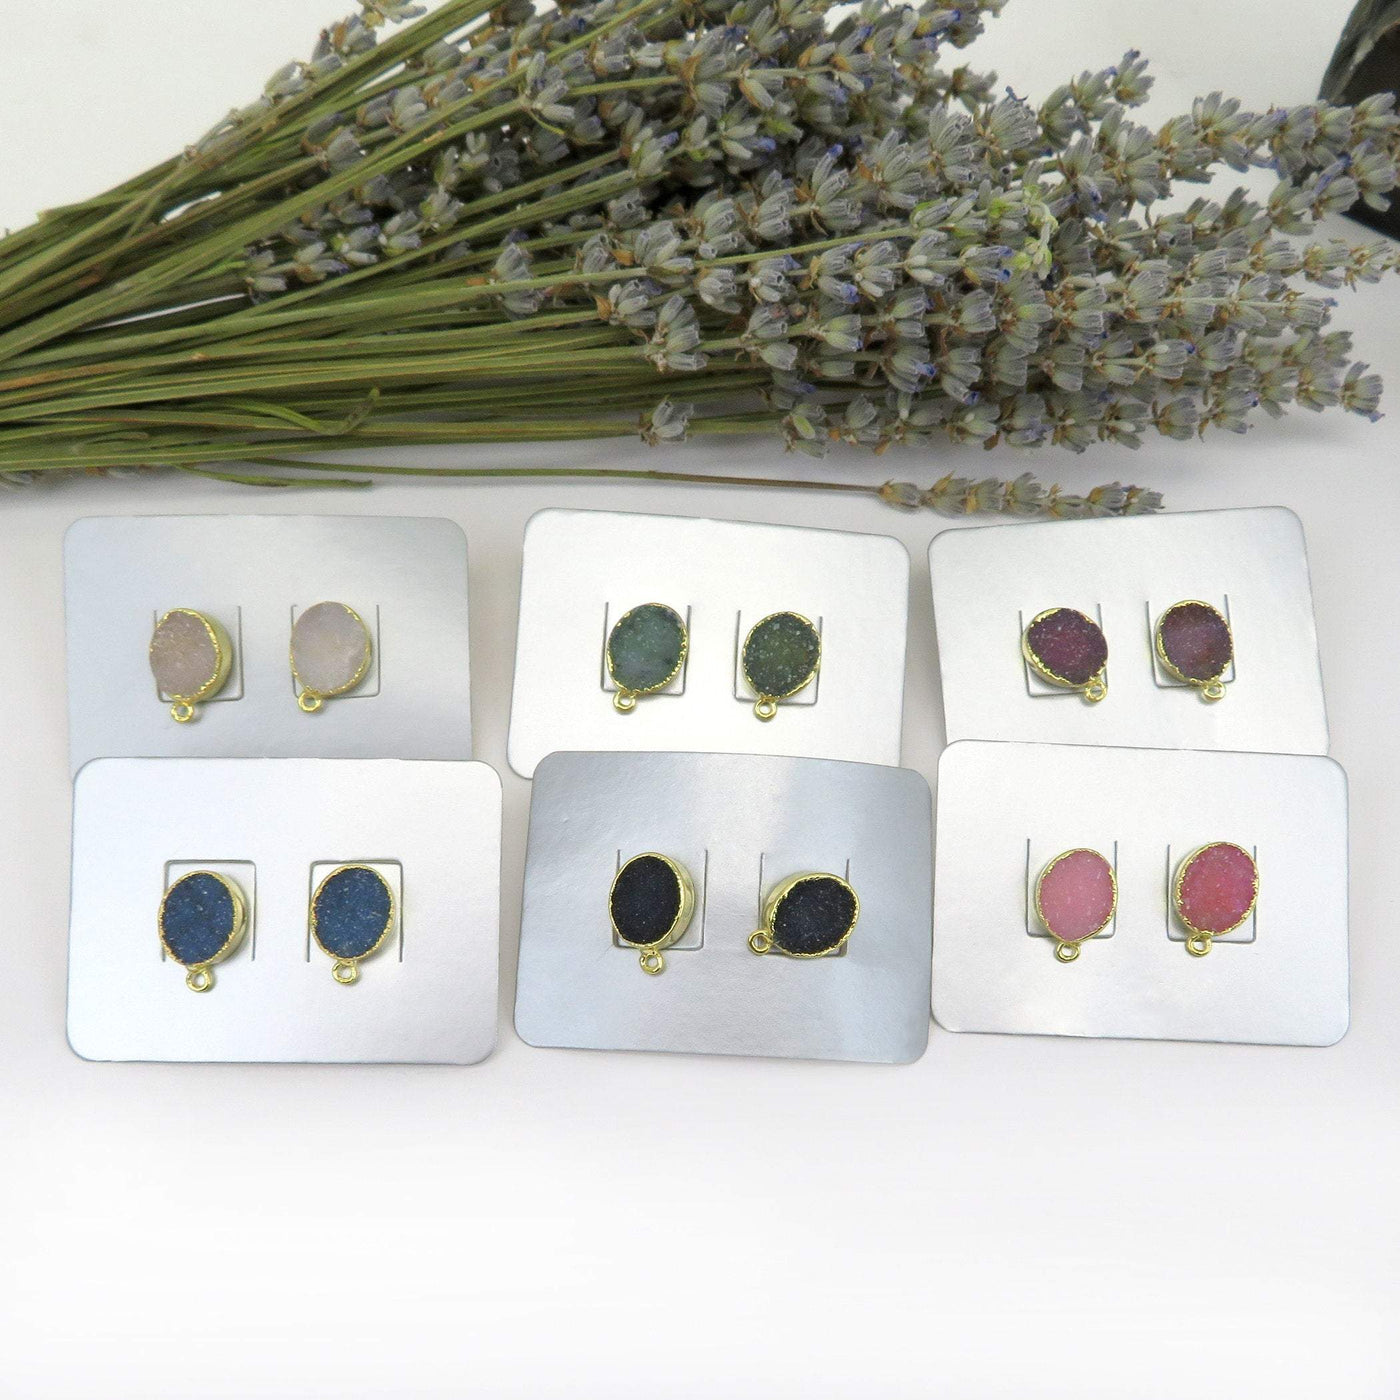 gold oval earrings come in white green purple blue black pink